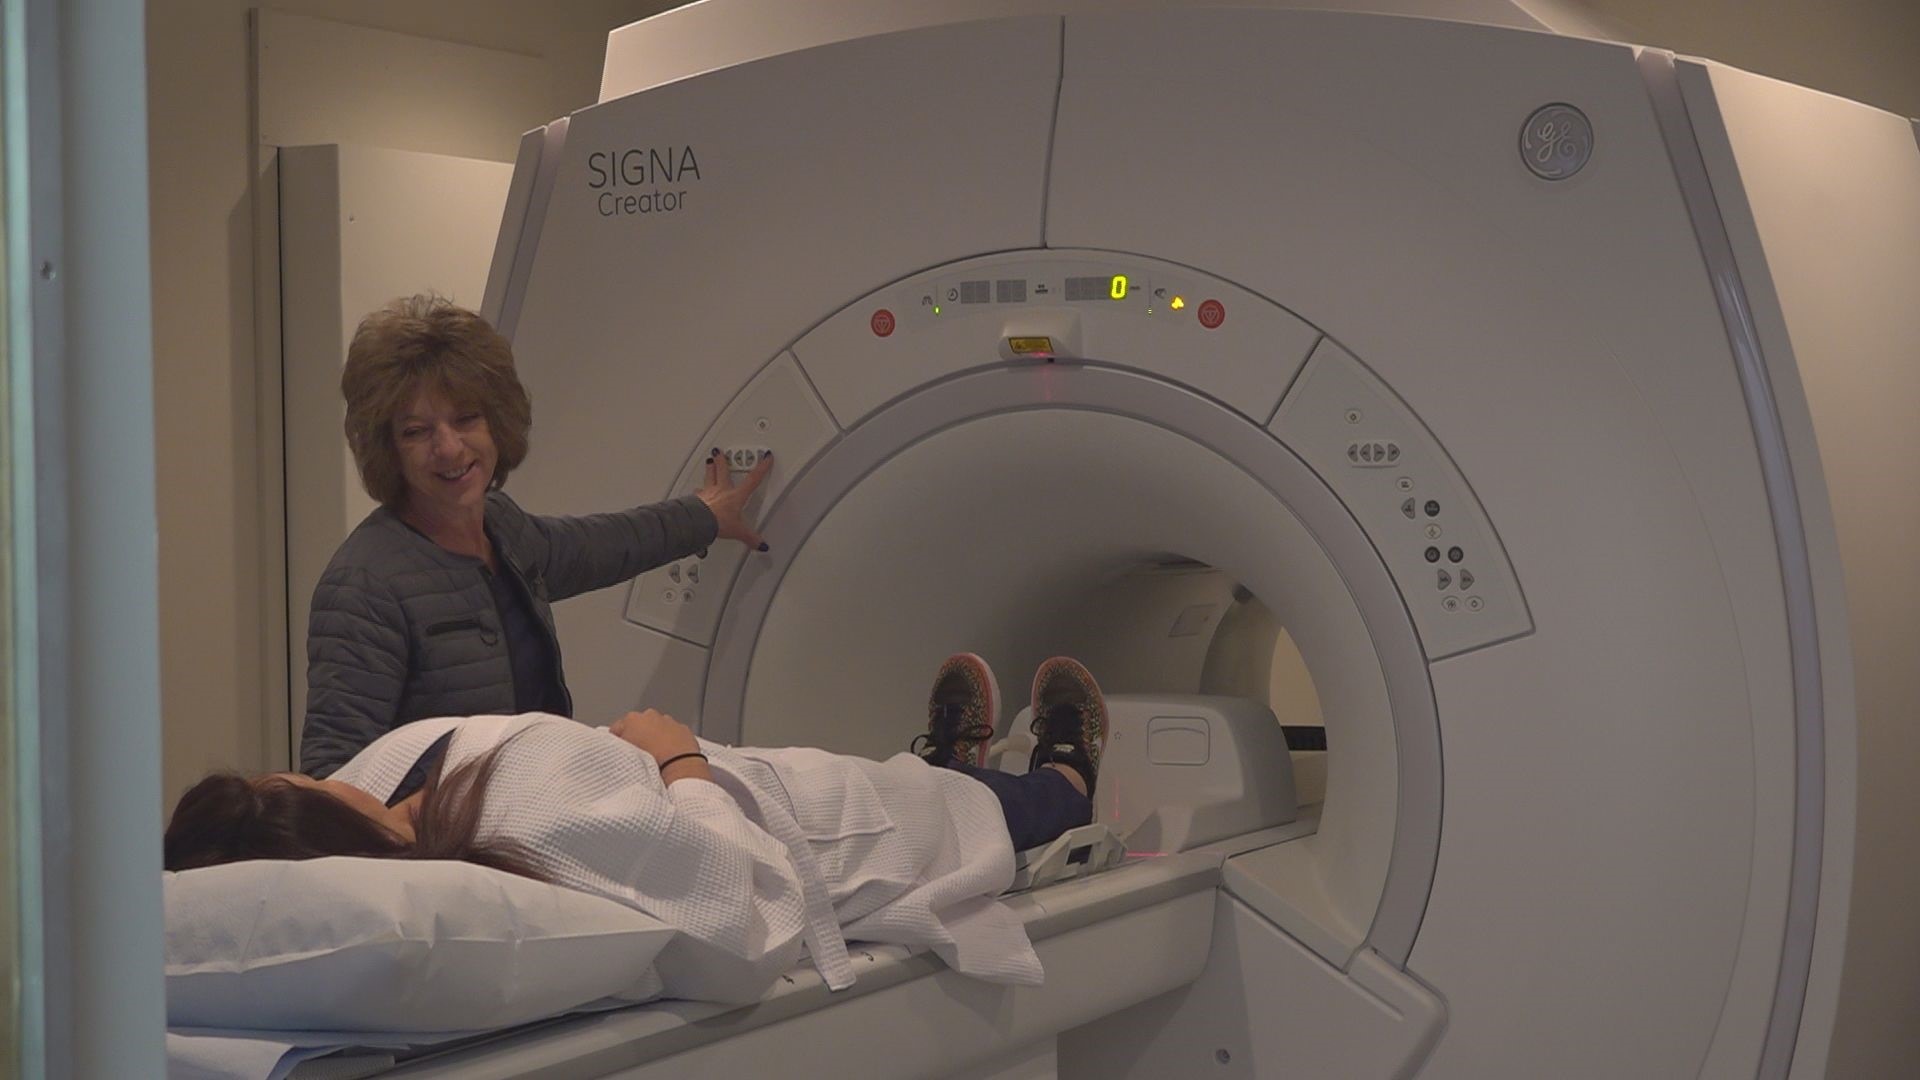 Ideal MRI is having their grand opening Tuesday at 10 a.m. and a ribbon cutting with the Waco Chamber of Commerce.